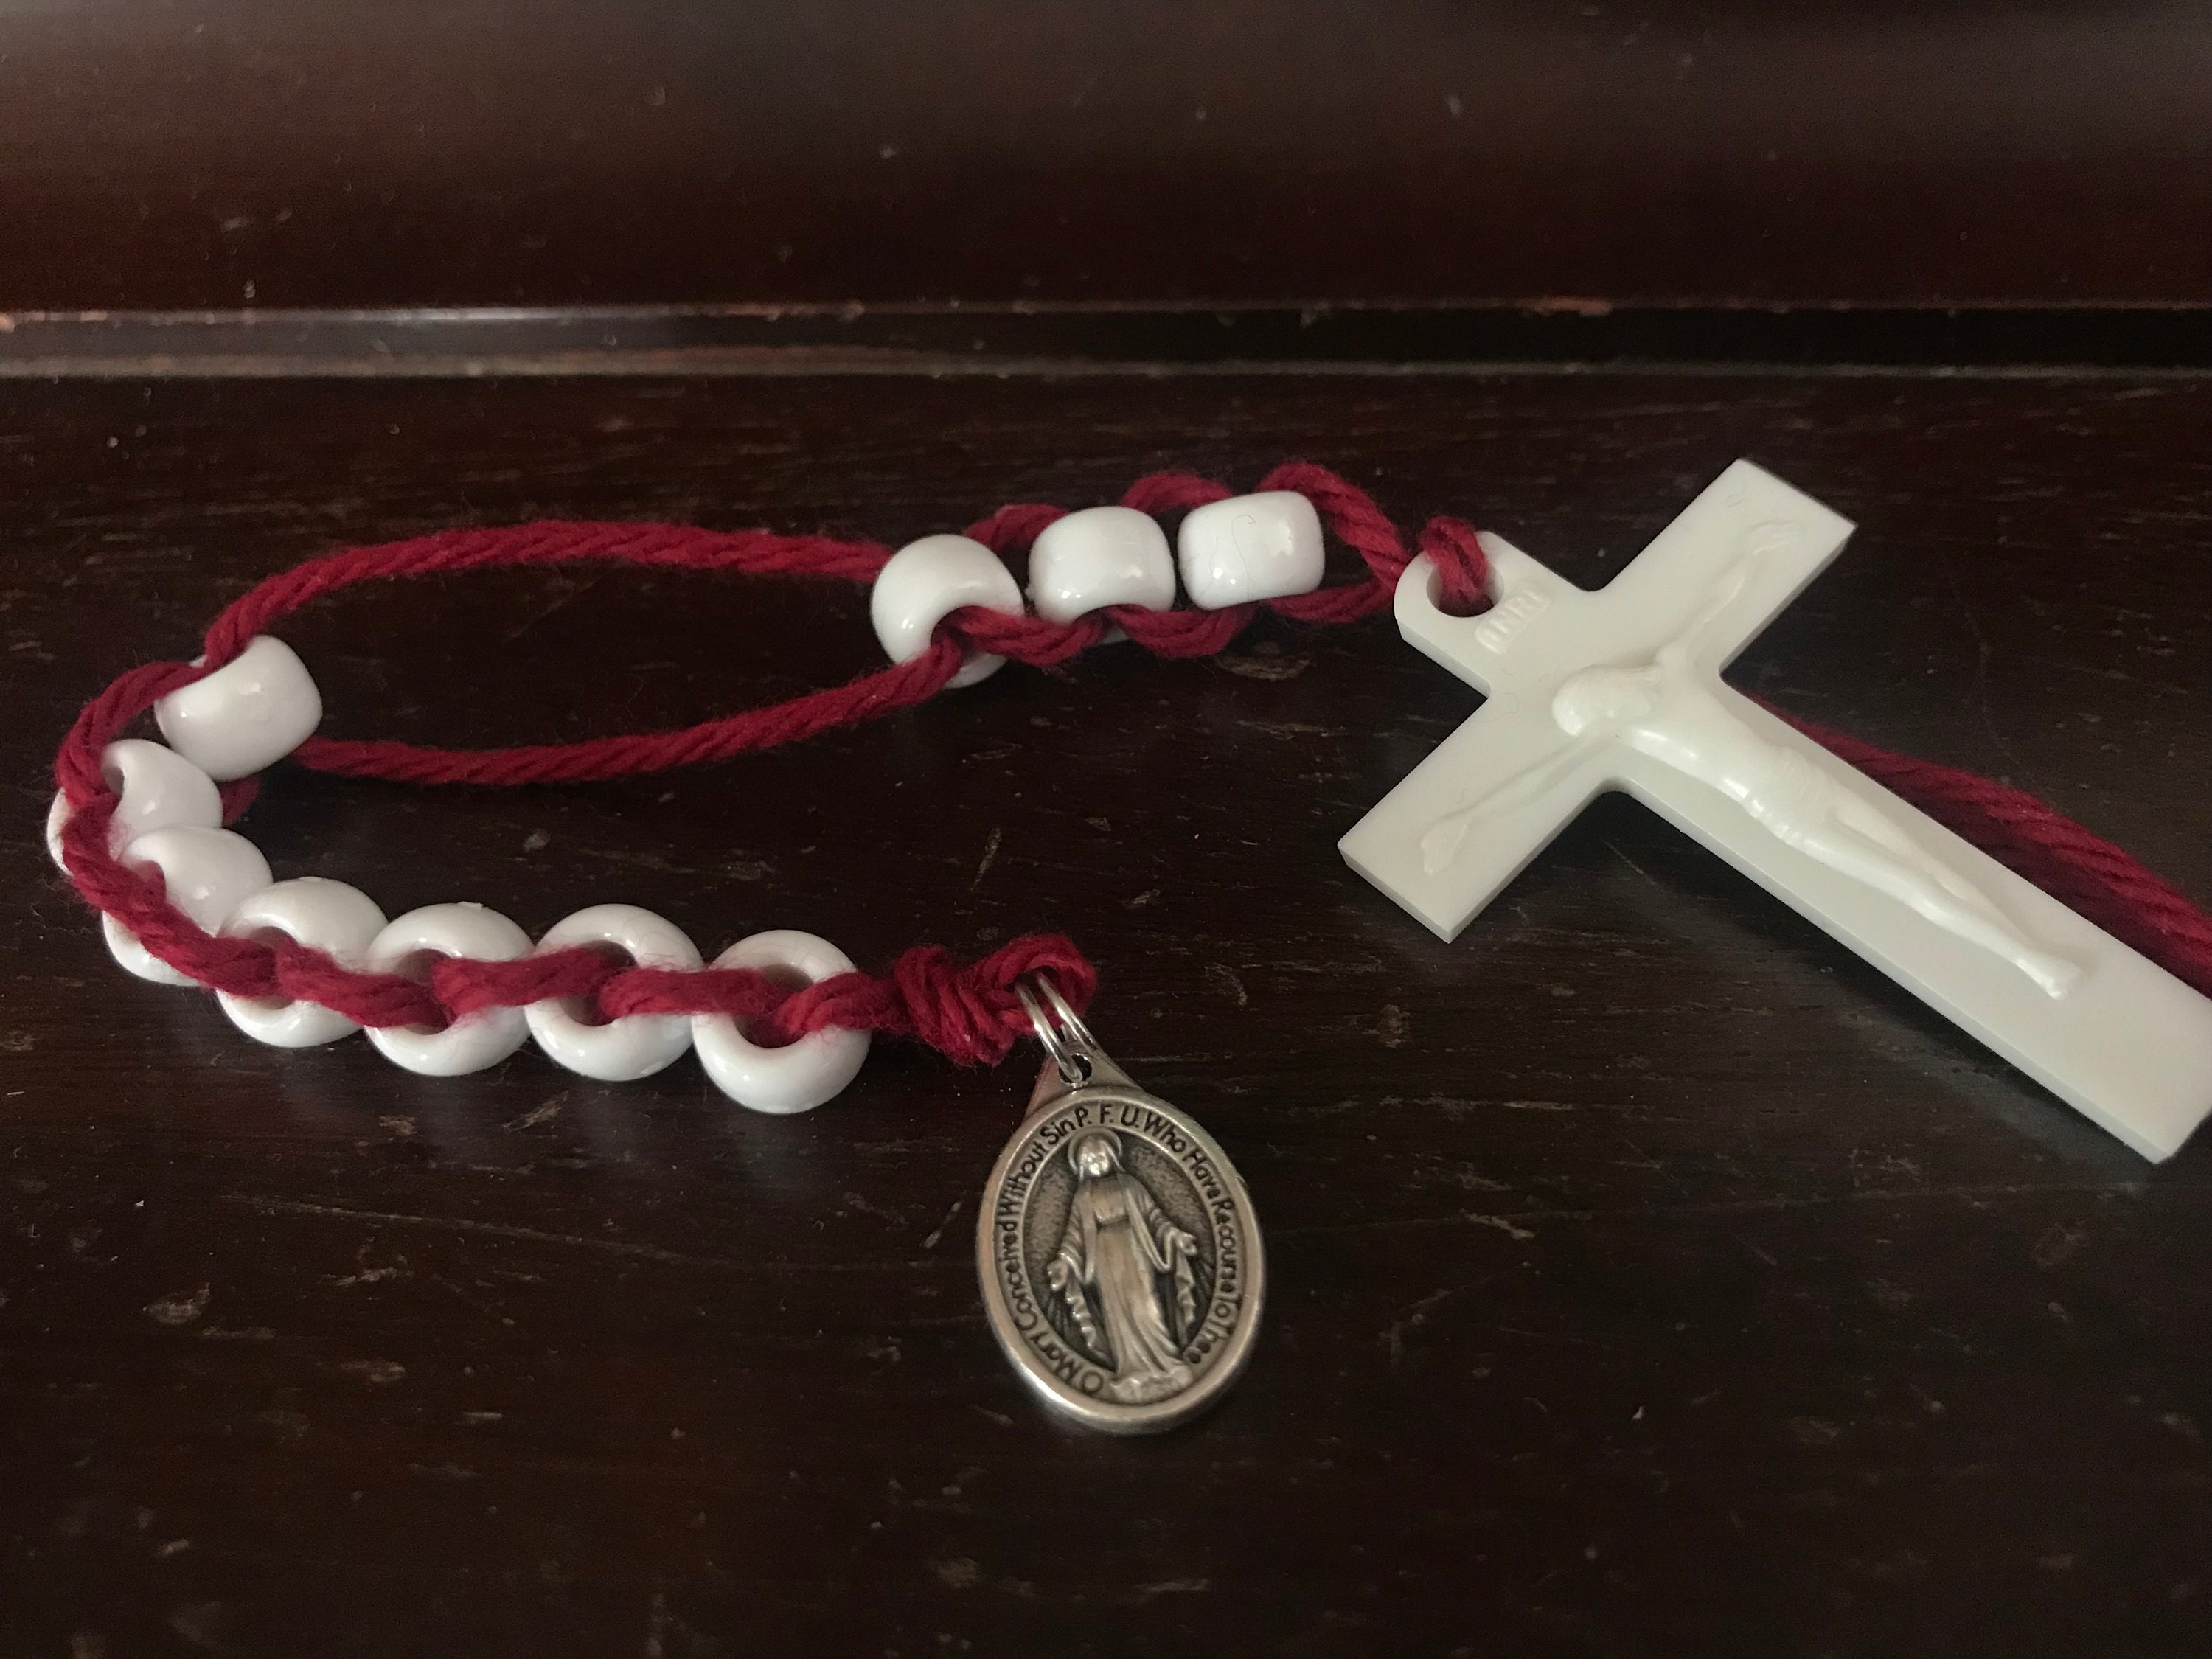 Sacrifice Beads Kit with Plastic Cross and Miraculous Medal